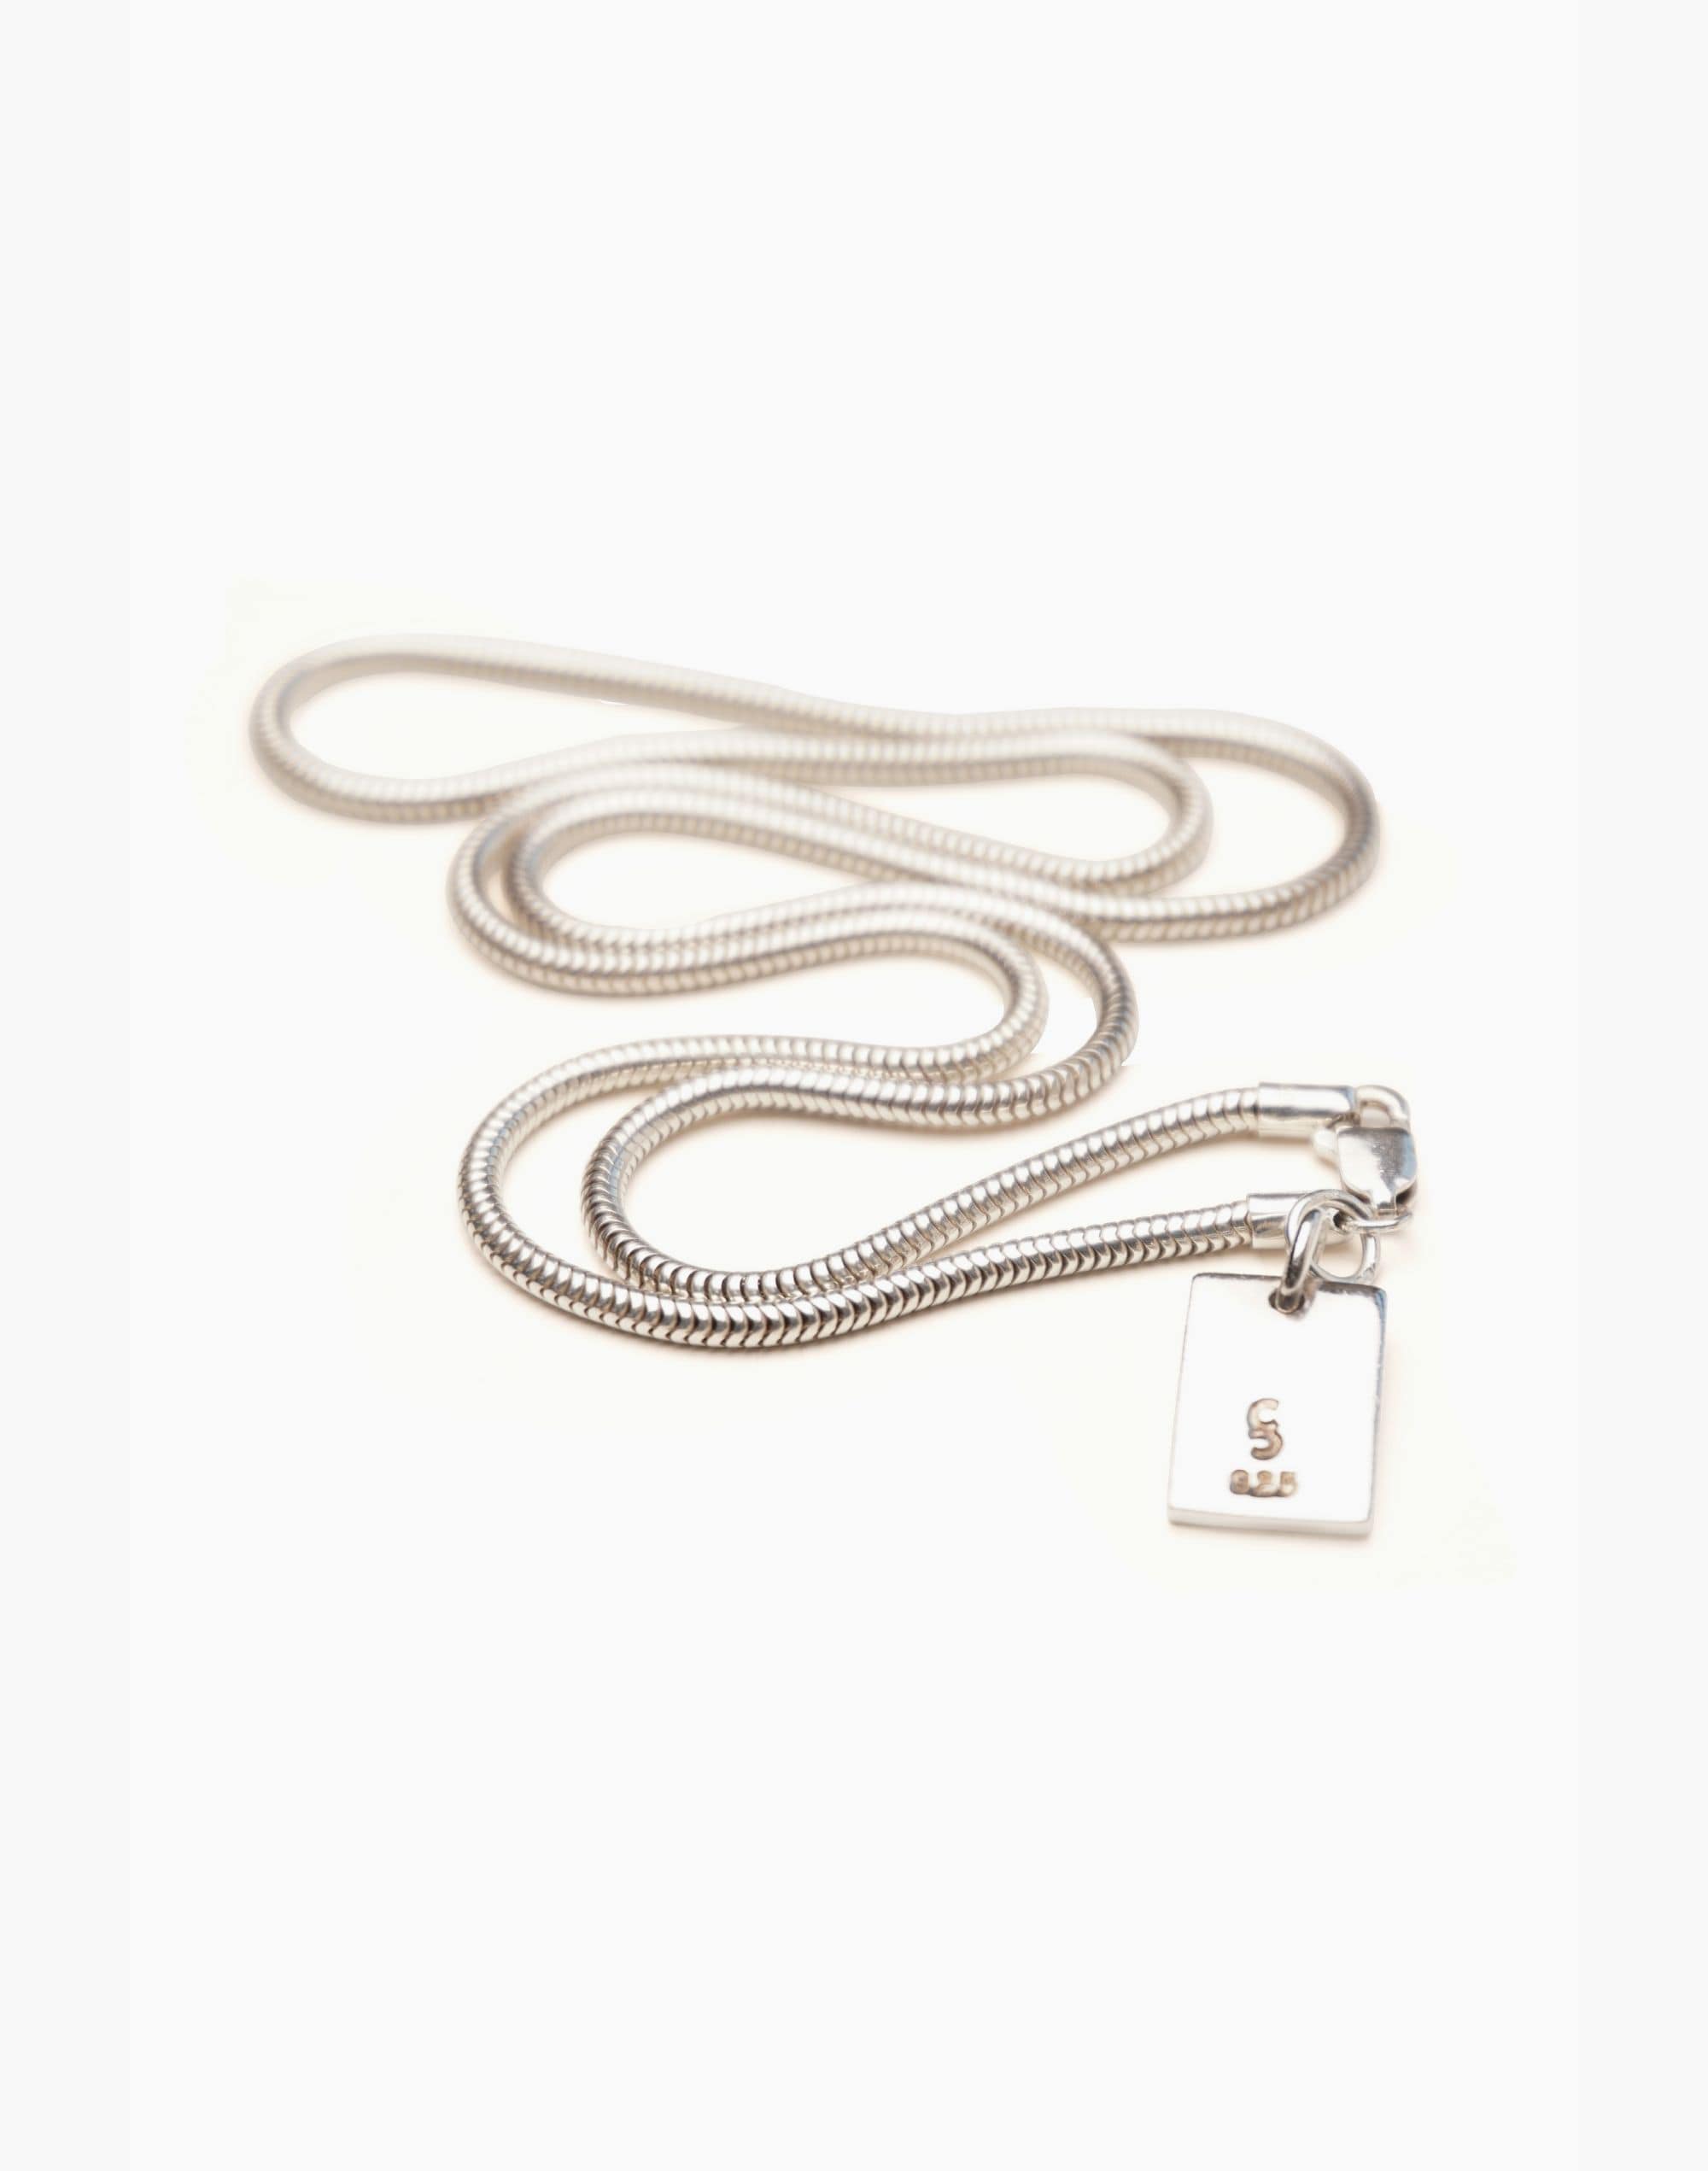 CHARLOTTE CAUWE STUDIO Snake Chain Necklace in Sterling Silver